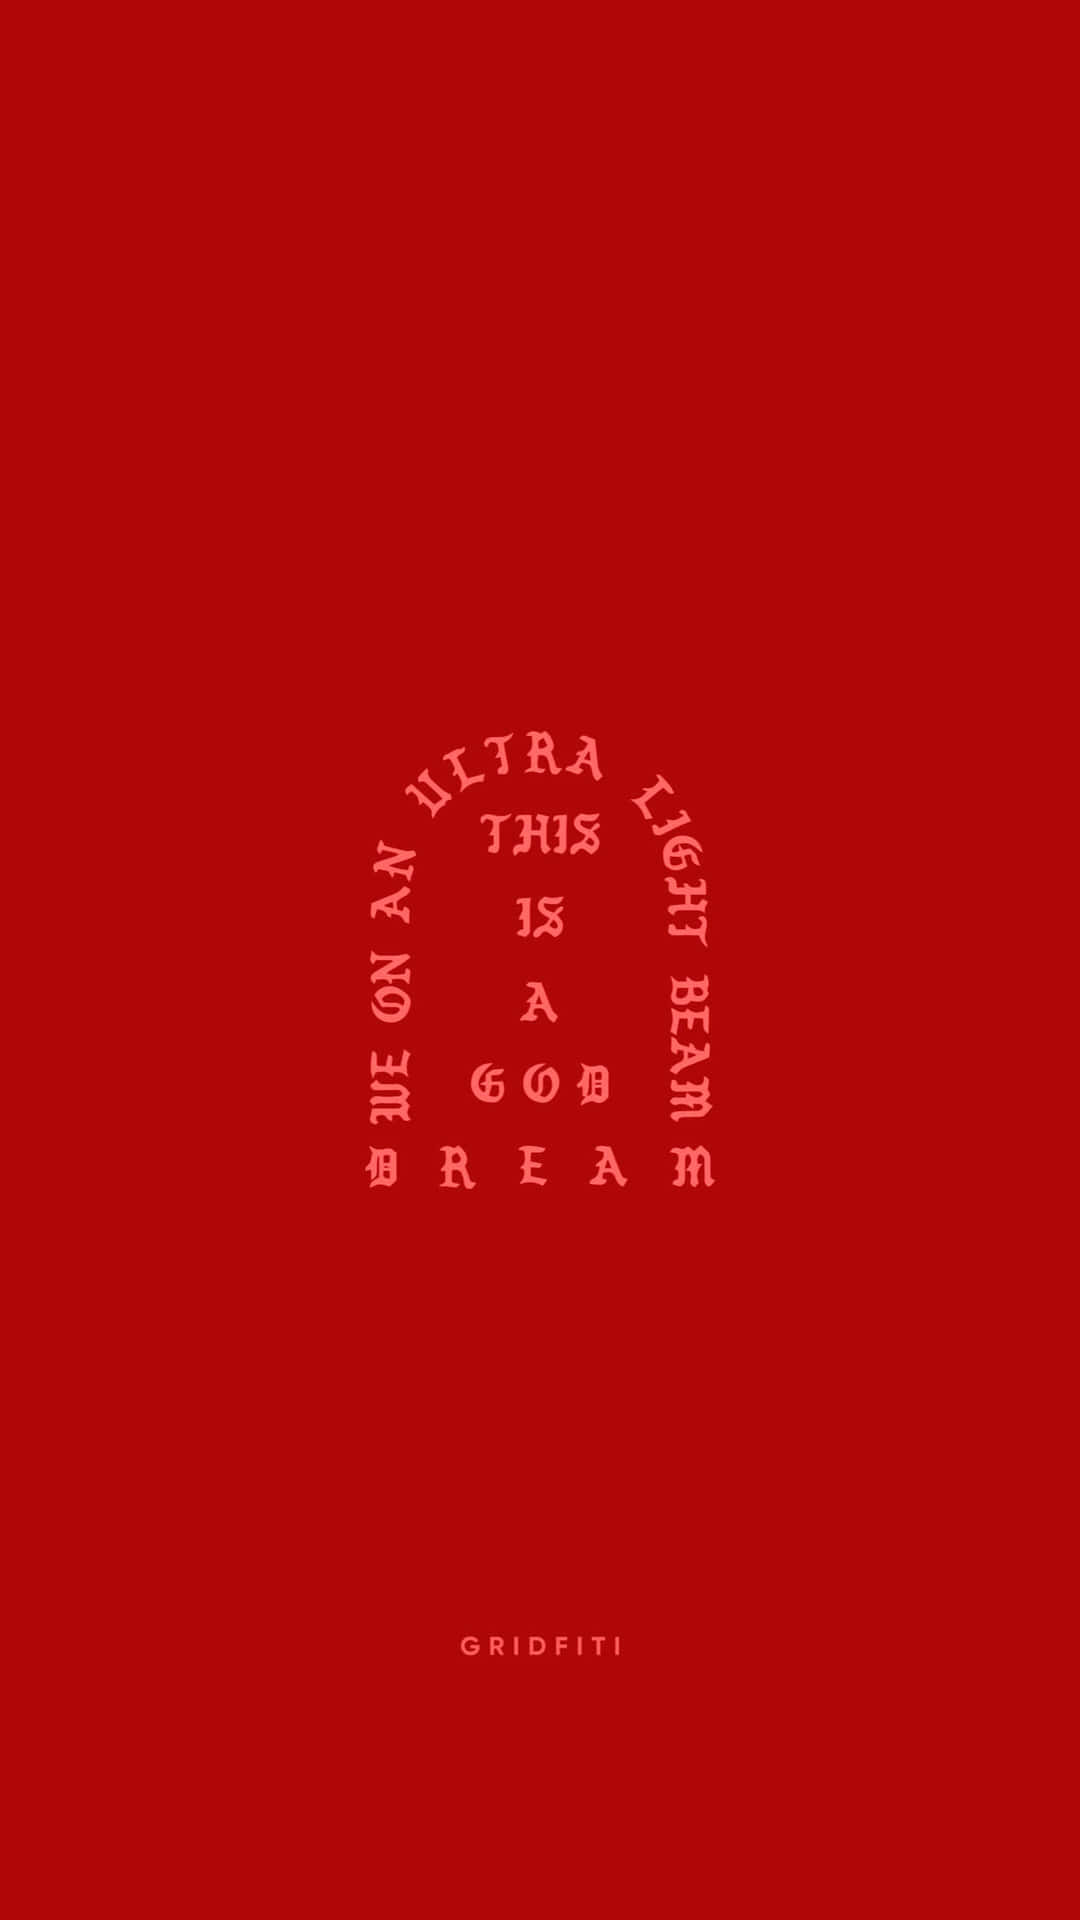 Kanye West releases 'The Life of Pablo' Wallpaper